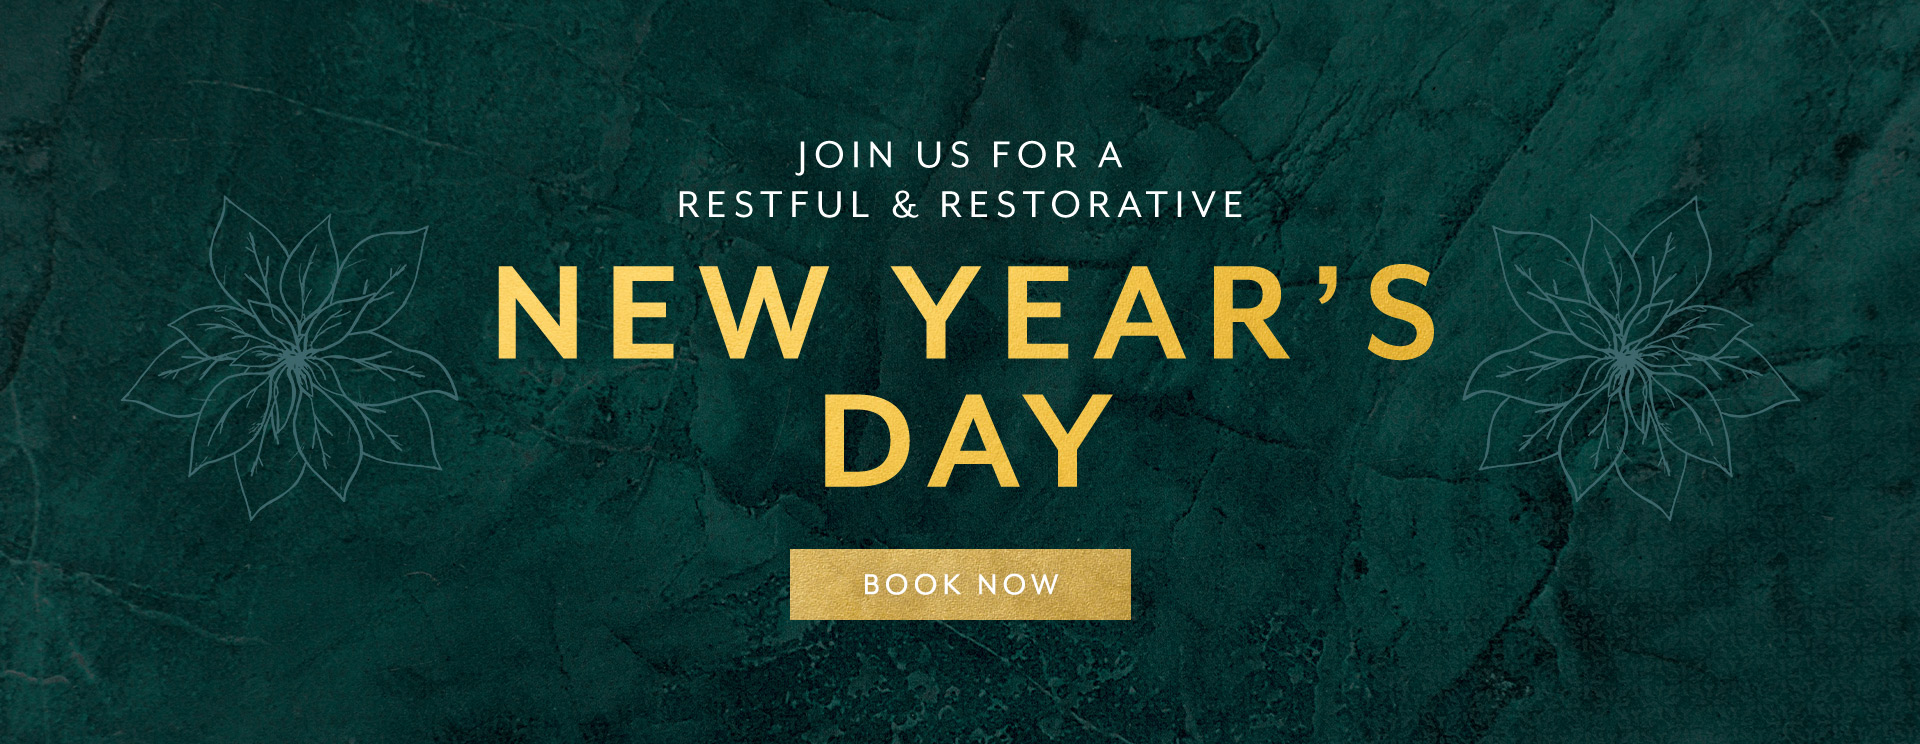 New Year's Day at The George & Dragon